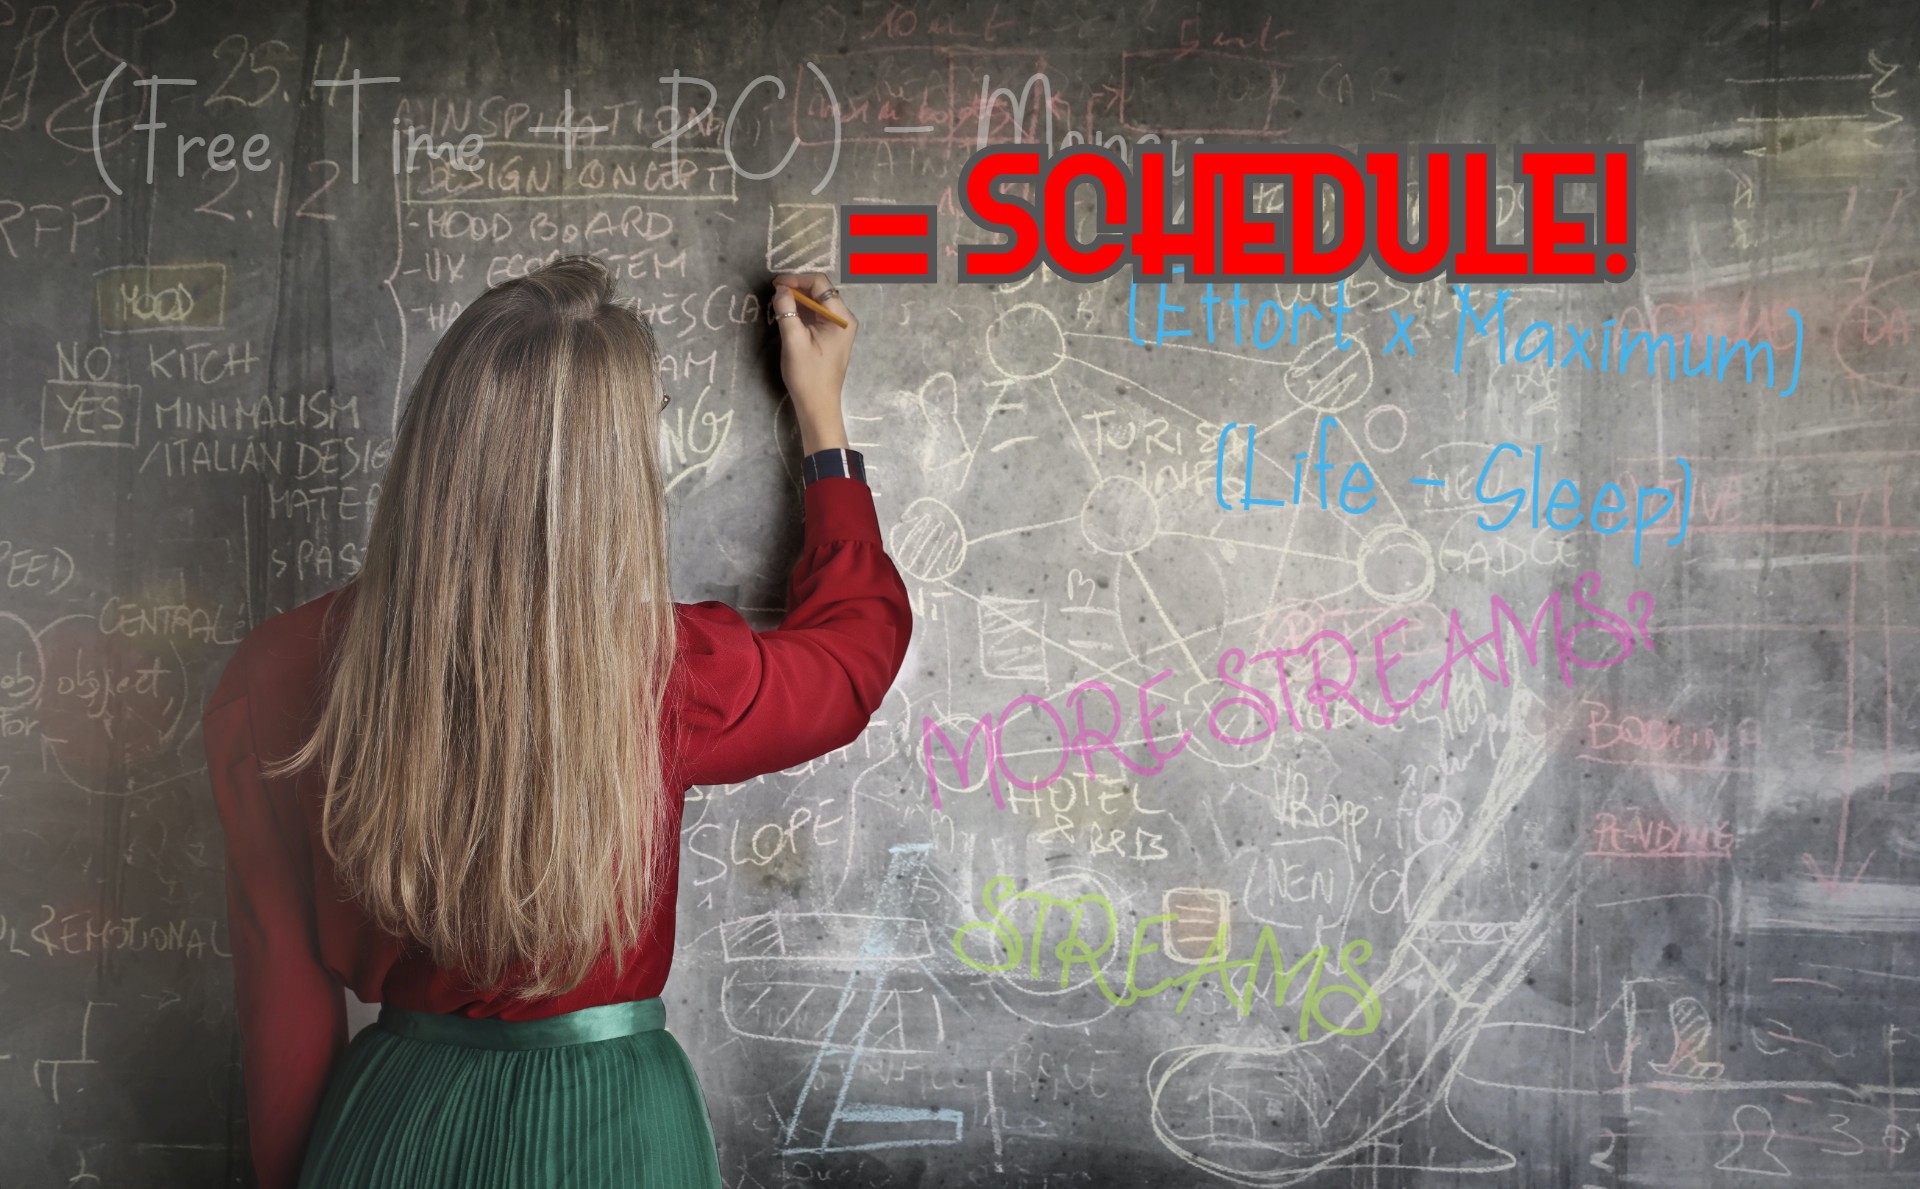 Woman writing on chalkboard, with the word SCHEDULE featured prominently